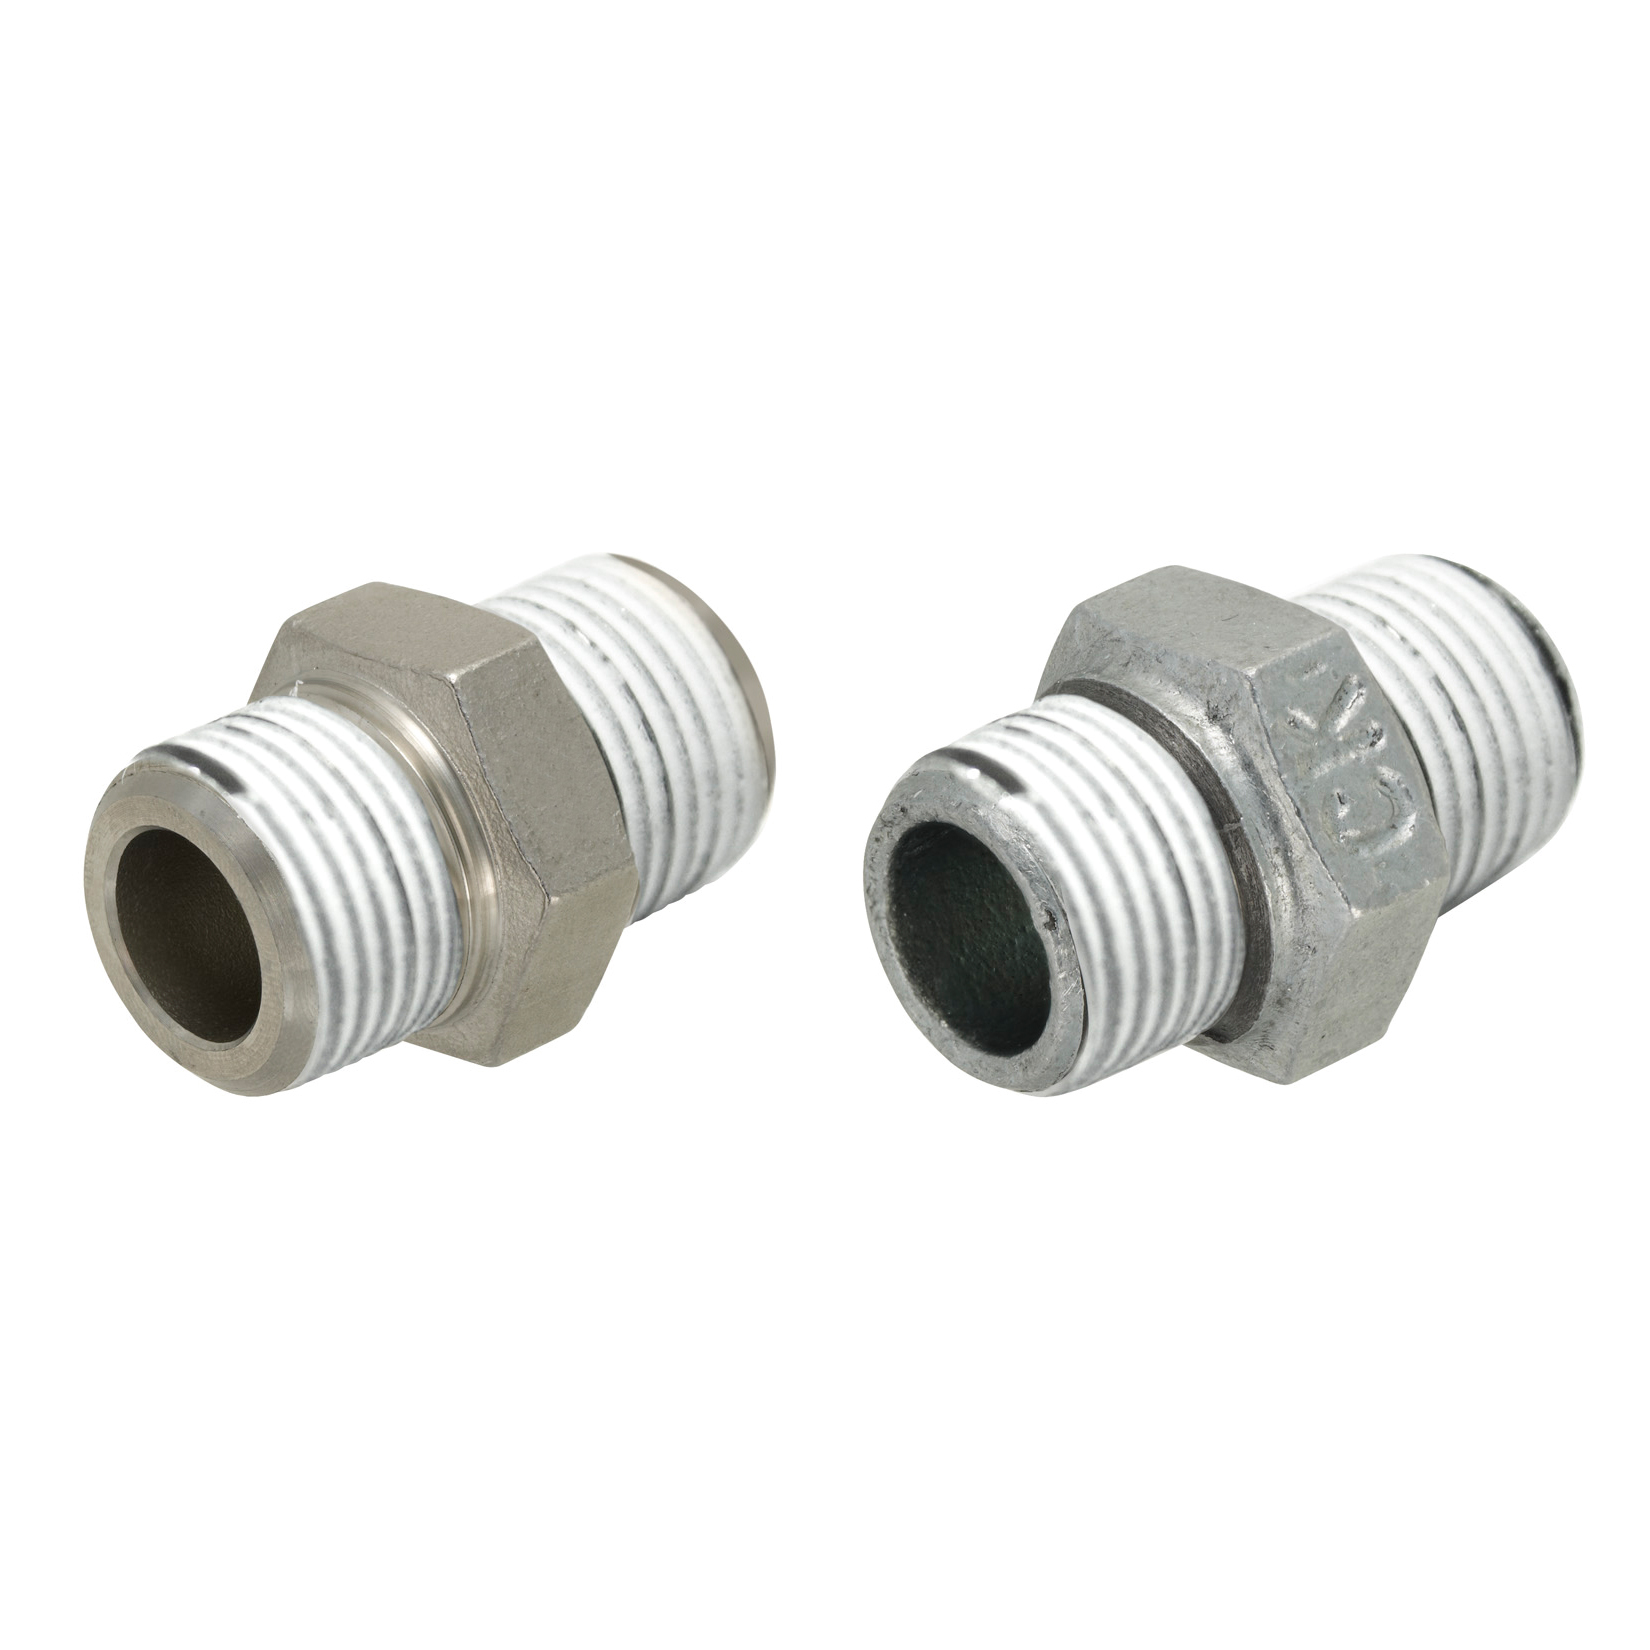 Low Pressure Fittings/With Seal Coating/Hexagon Nipple (SGCNR8A) 